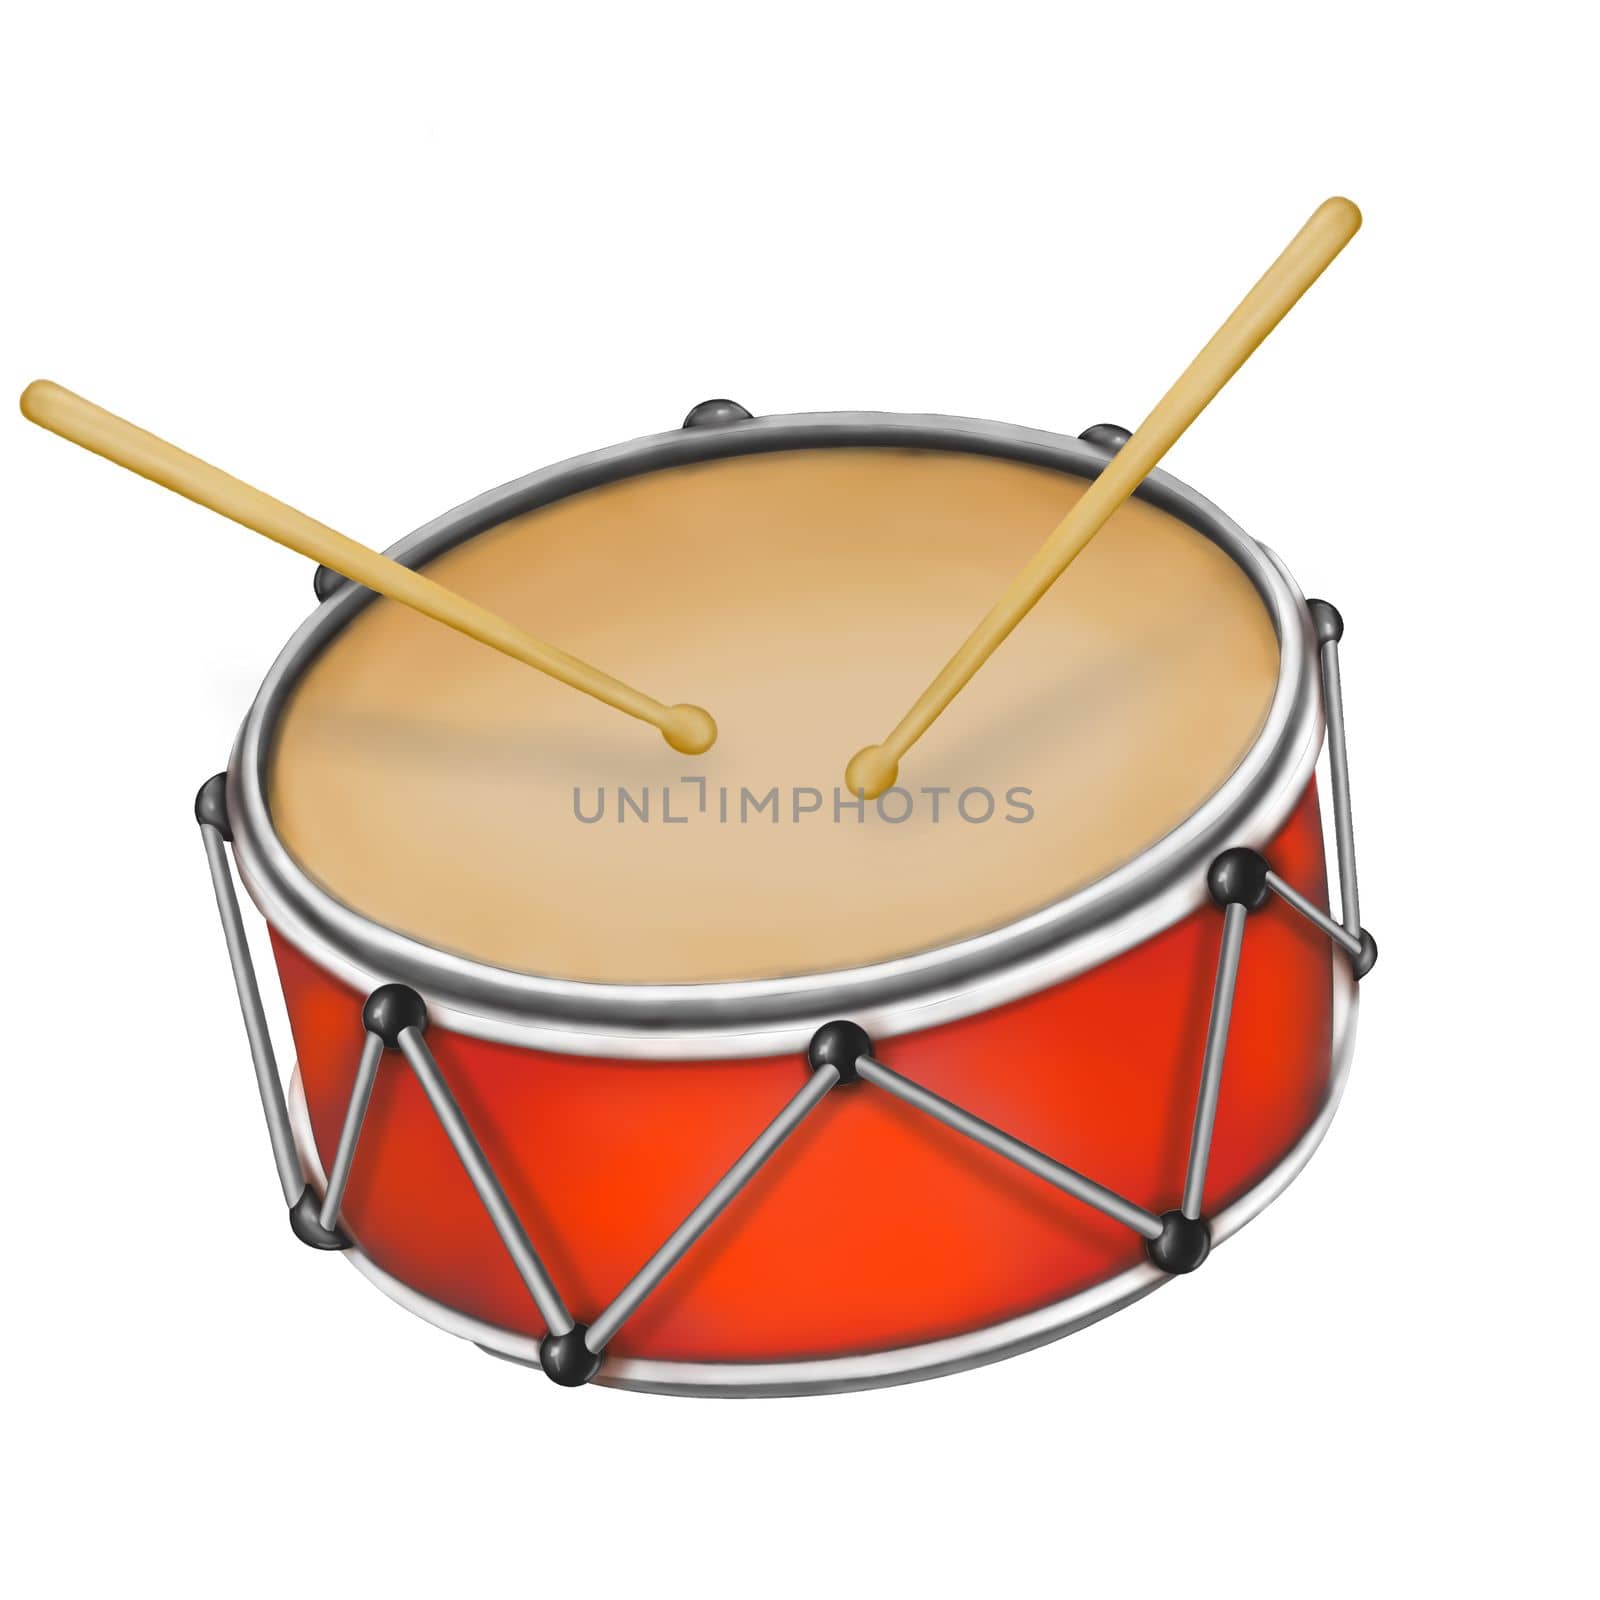 Illustration of a child's drum on an isolated background. Clip art musical instruments. Drum by Alina_Lebed